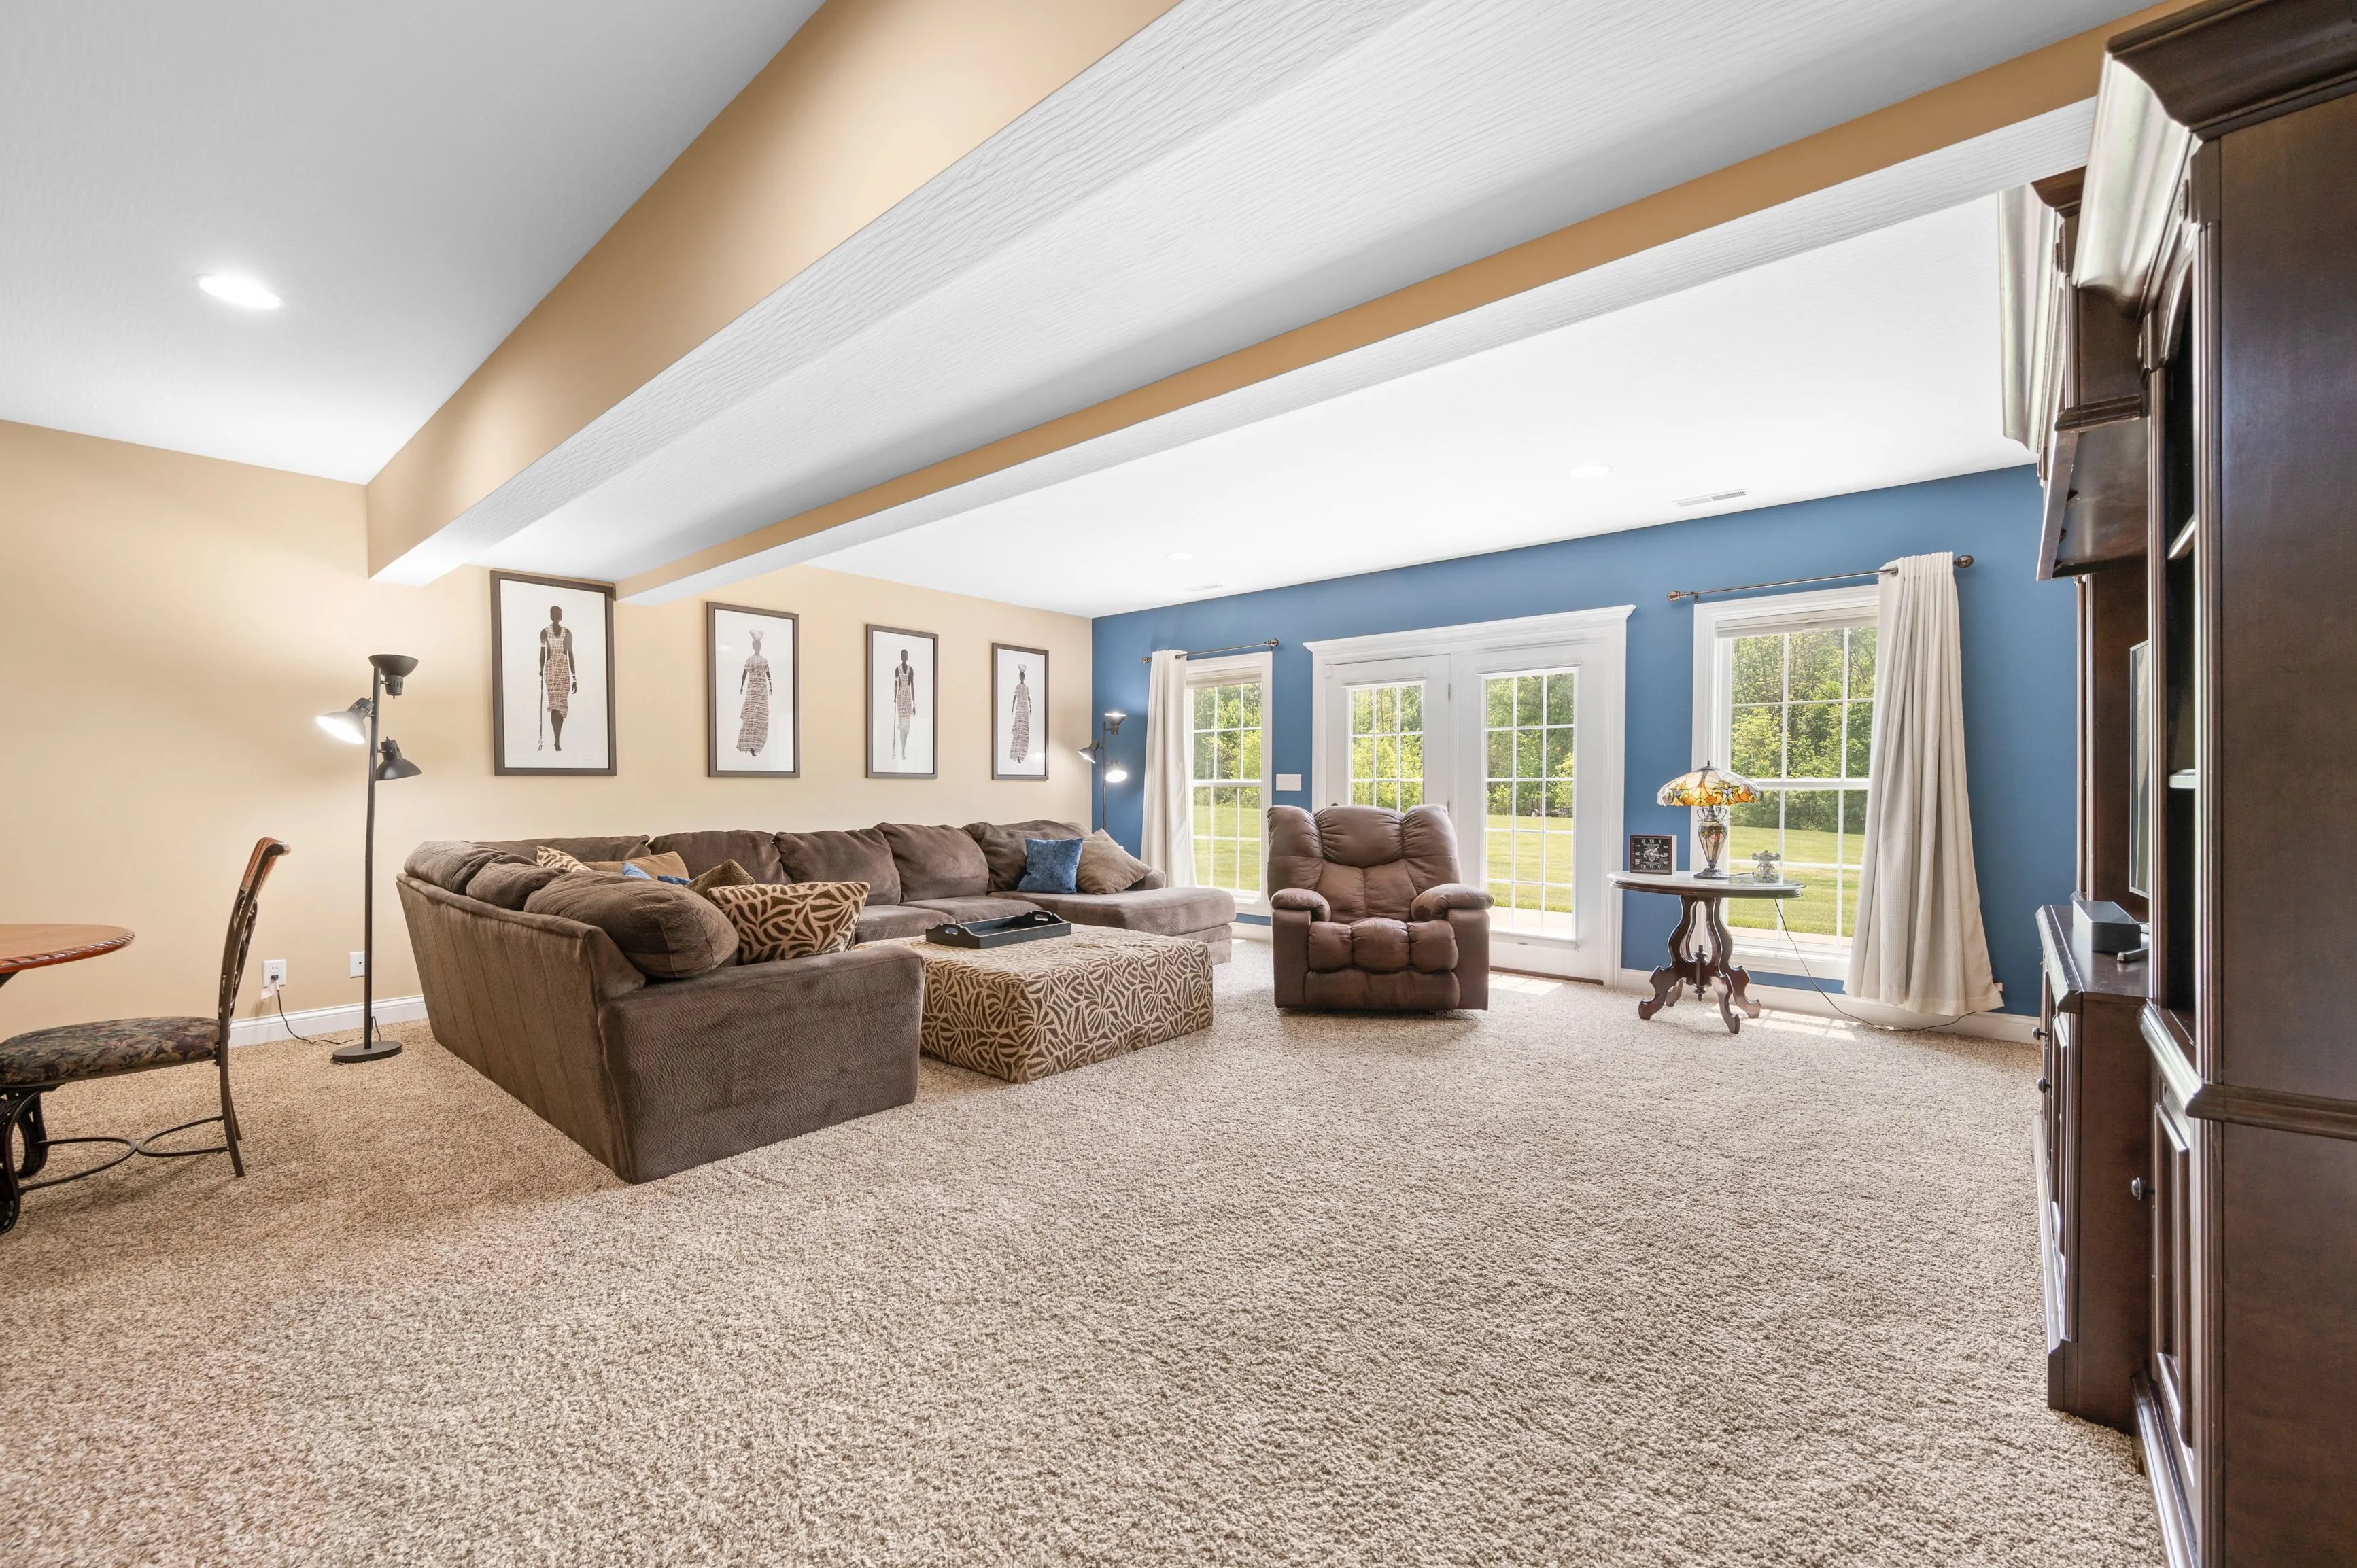 Spacious living room with beige carpeting, large brown sectional sofa, recliner, and framed artwork on the walls, accented by blue-painted walls and white trim with ample natural light from windows.